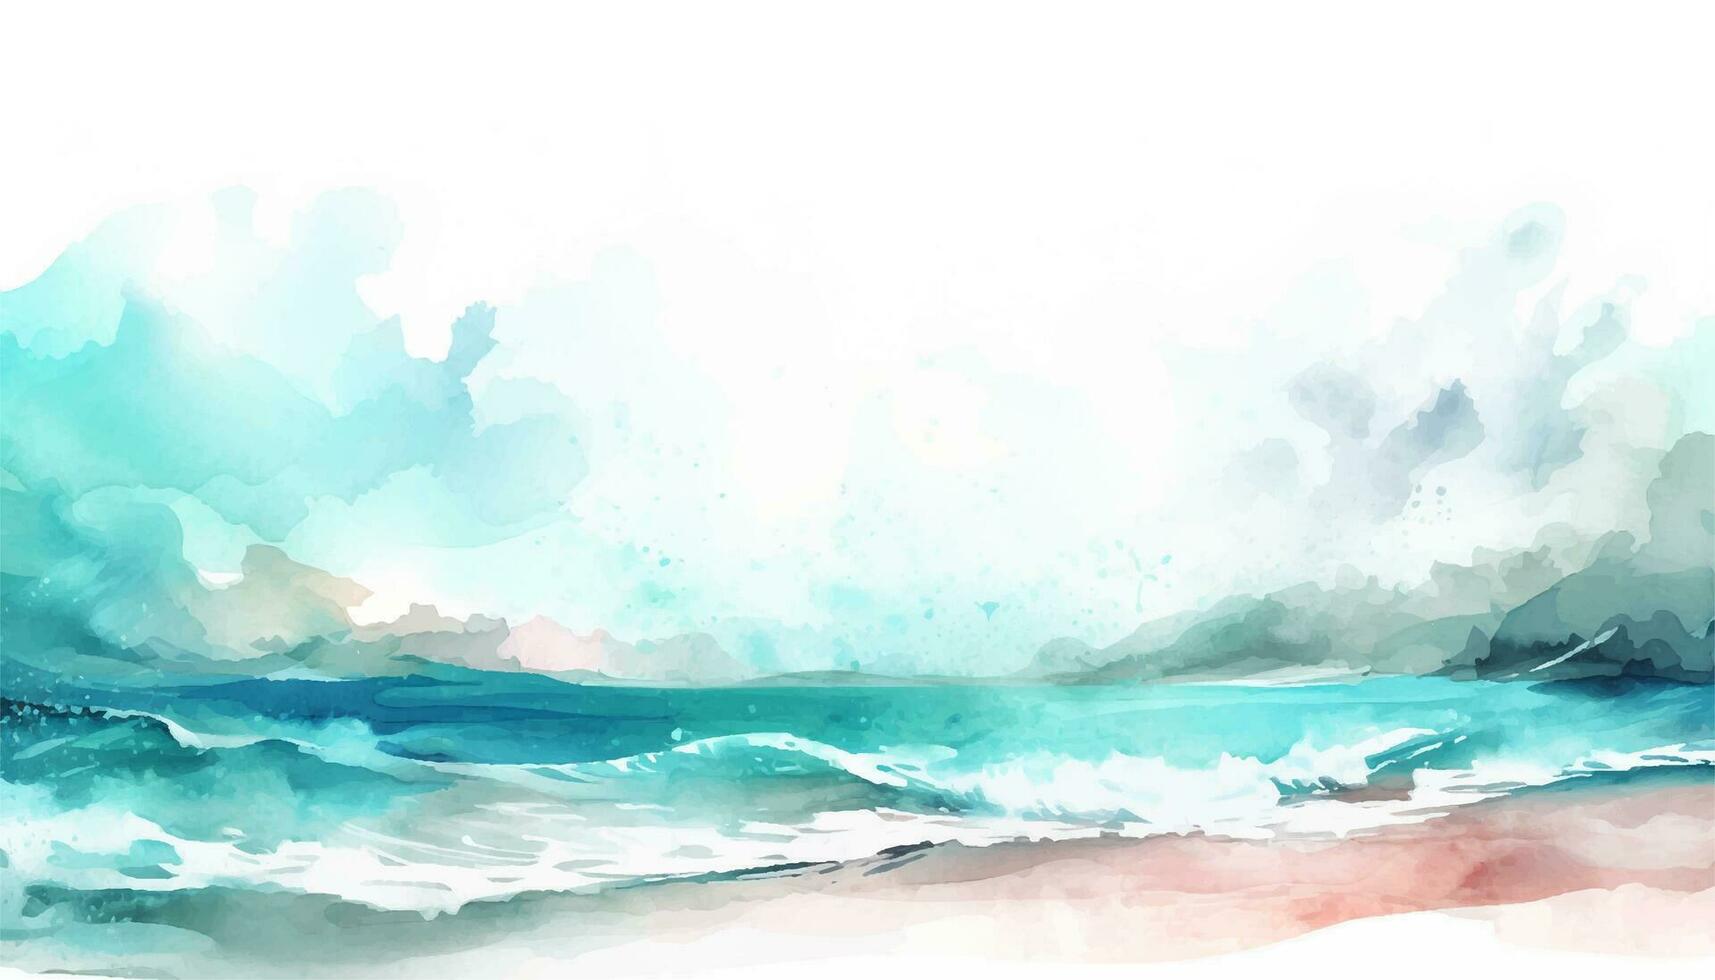 Abstract watercolor landscape with seascape and cool waves. Hand drawn illustration for your design and background with teal green and deep colors. vector